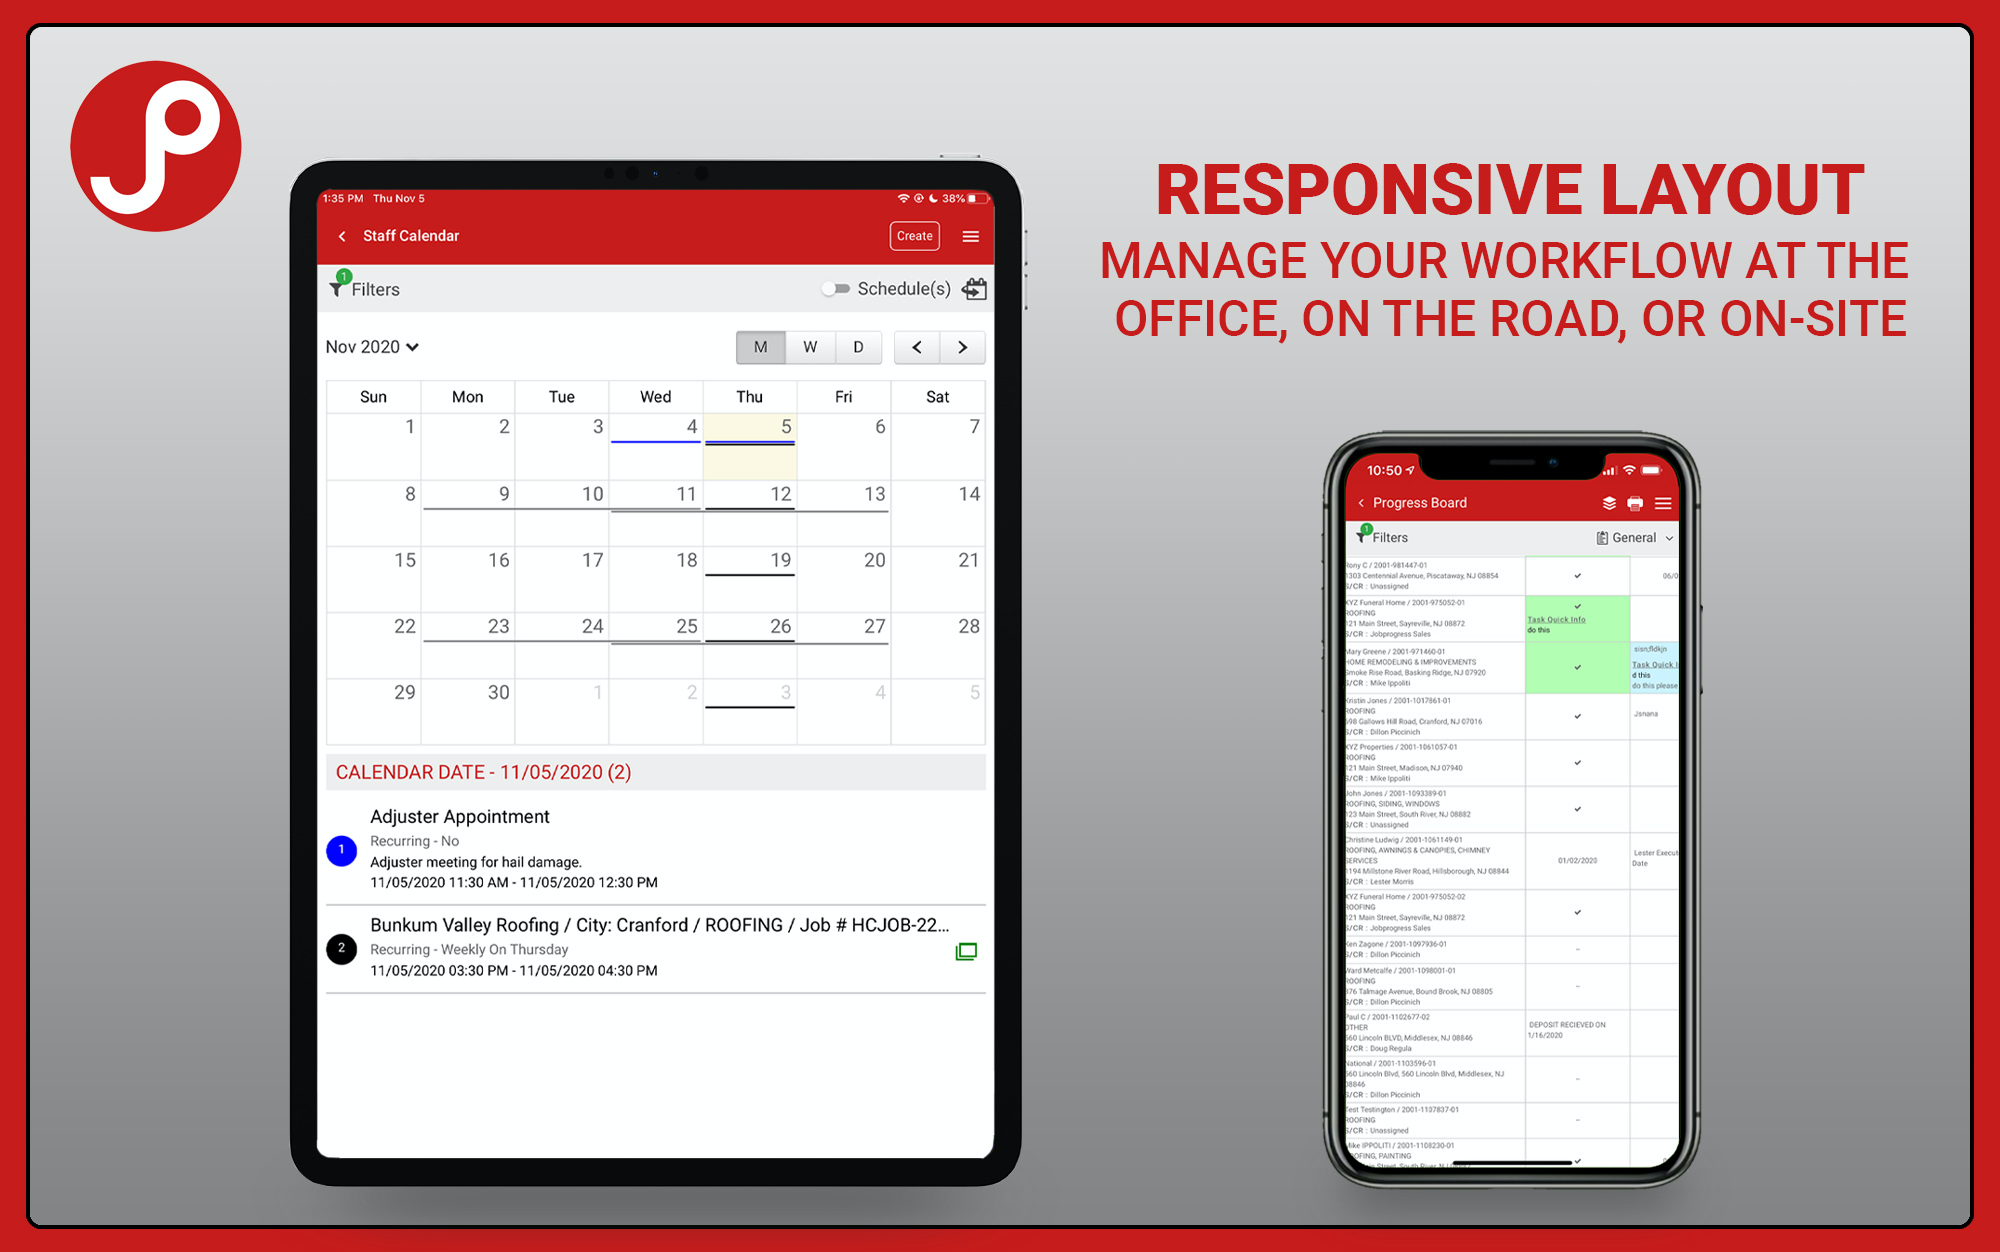 JOBPROGRESS Software - JobProgress can be used on your laptop, desktop, tablet, or smartphone. Our responsive layout gives you the ability to monitor your progress from anywhere at any time.